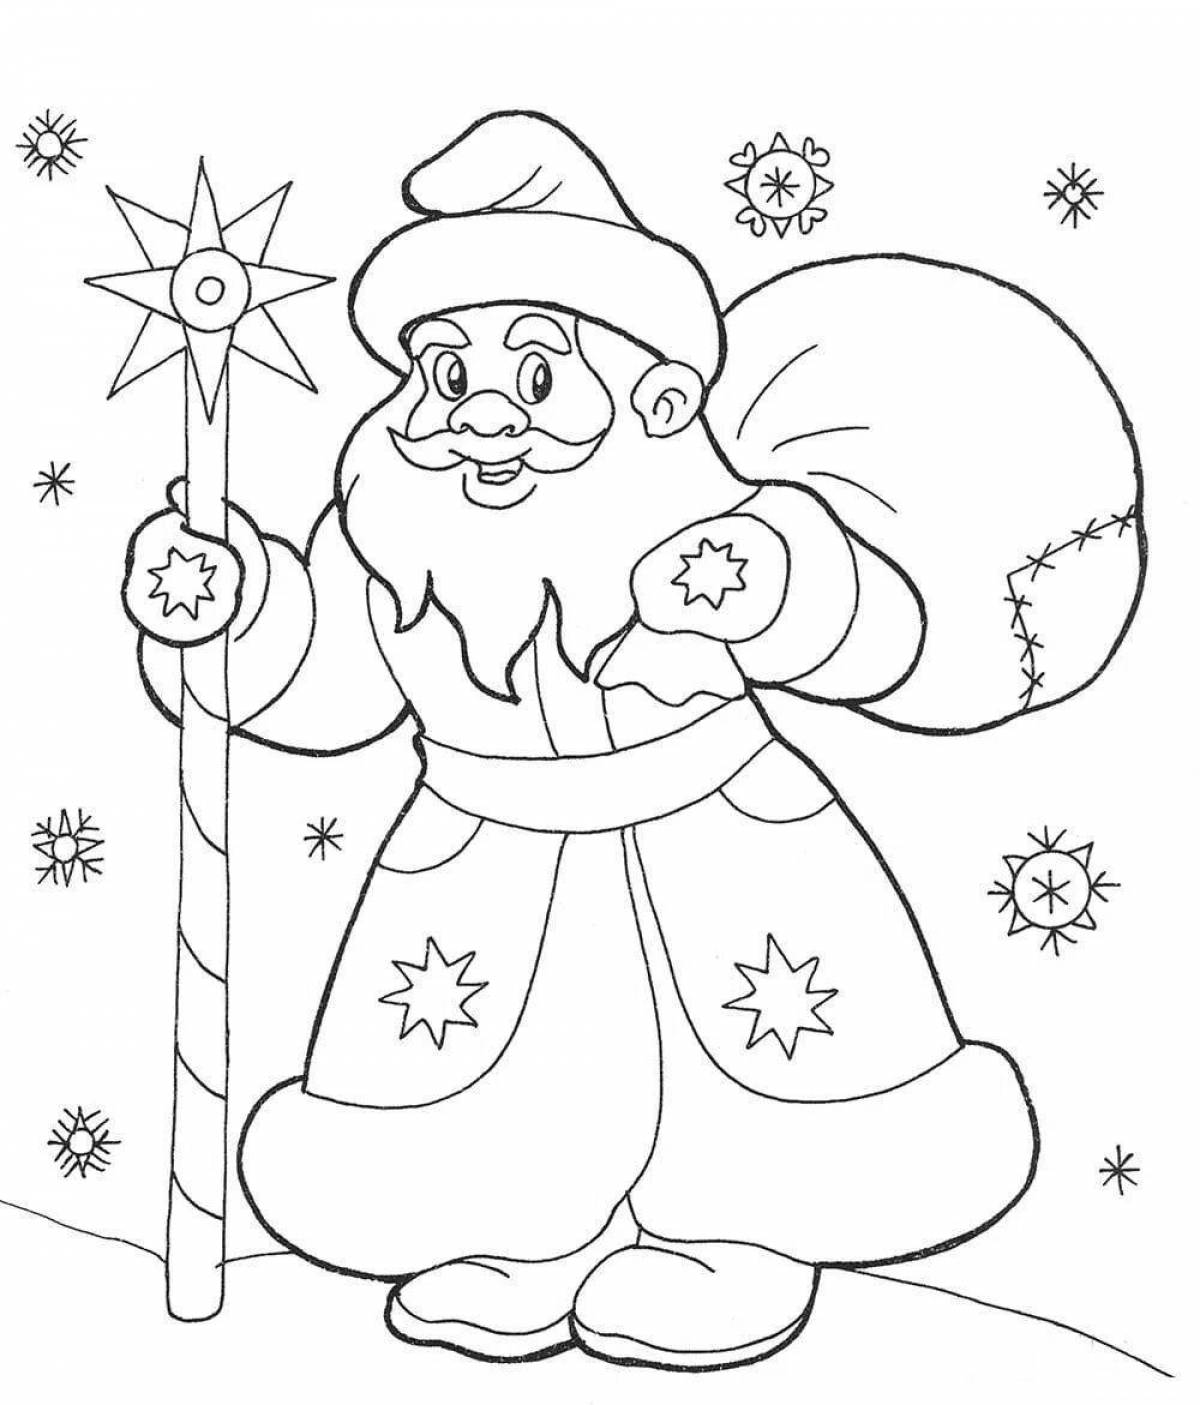 Coloring page santa claus is delighted